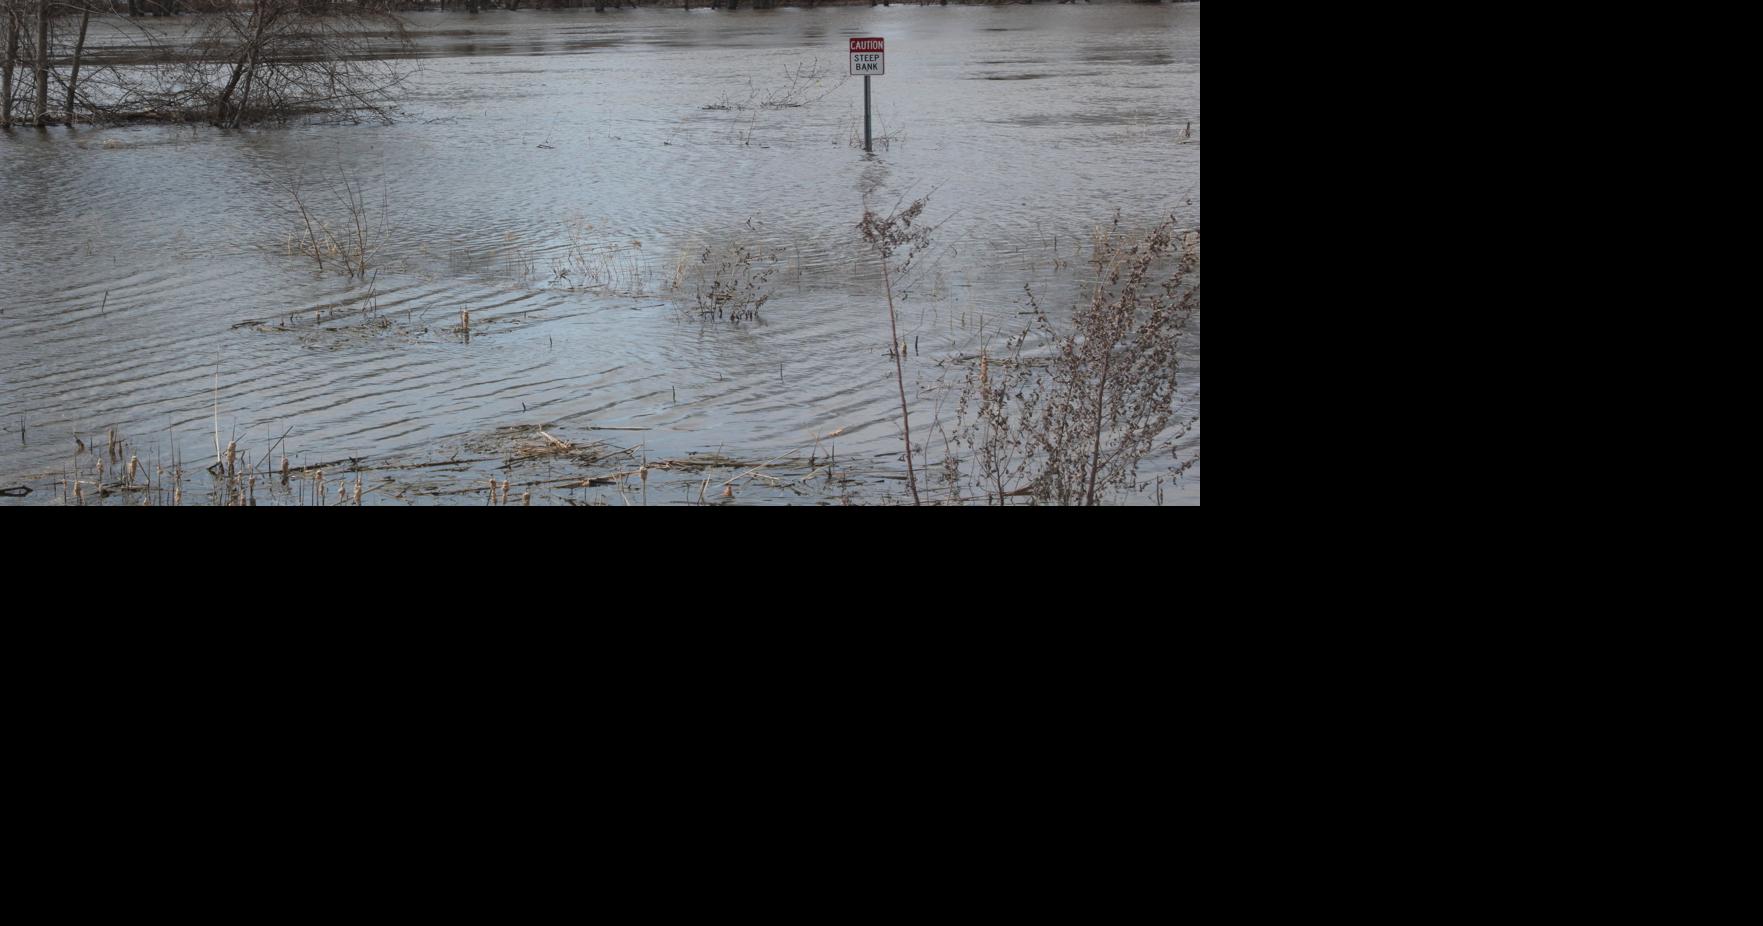 Experts say Minnesota River flooding could cause damage to Shakopee